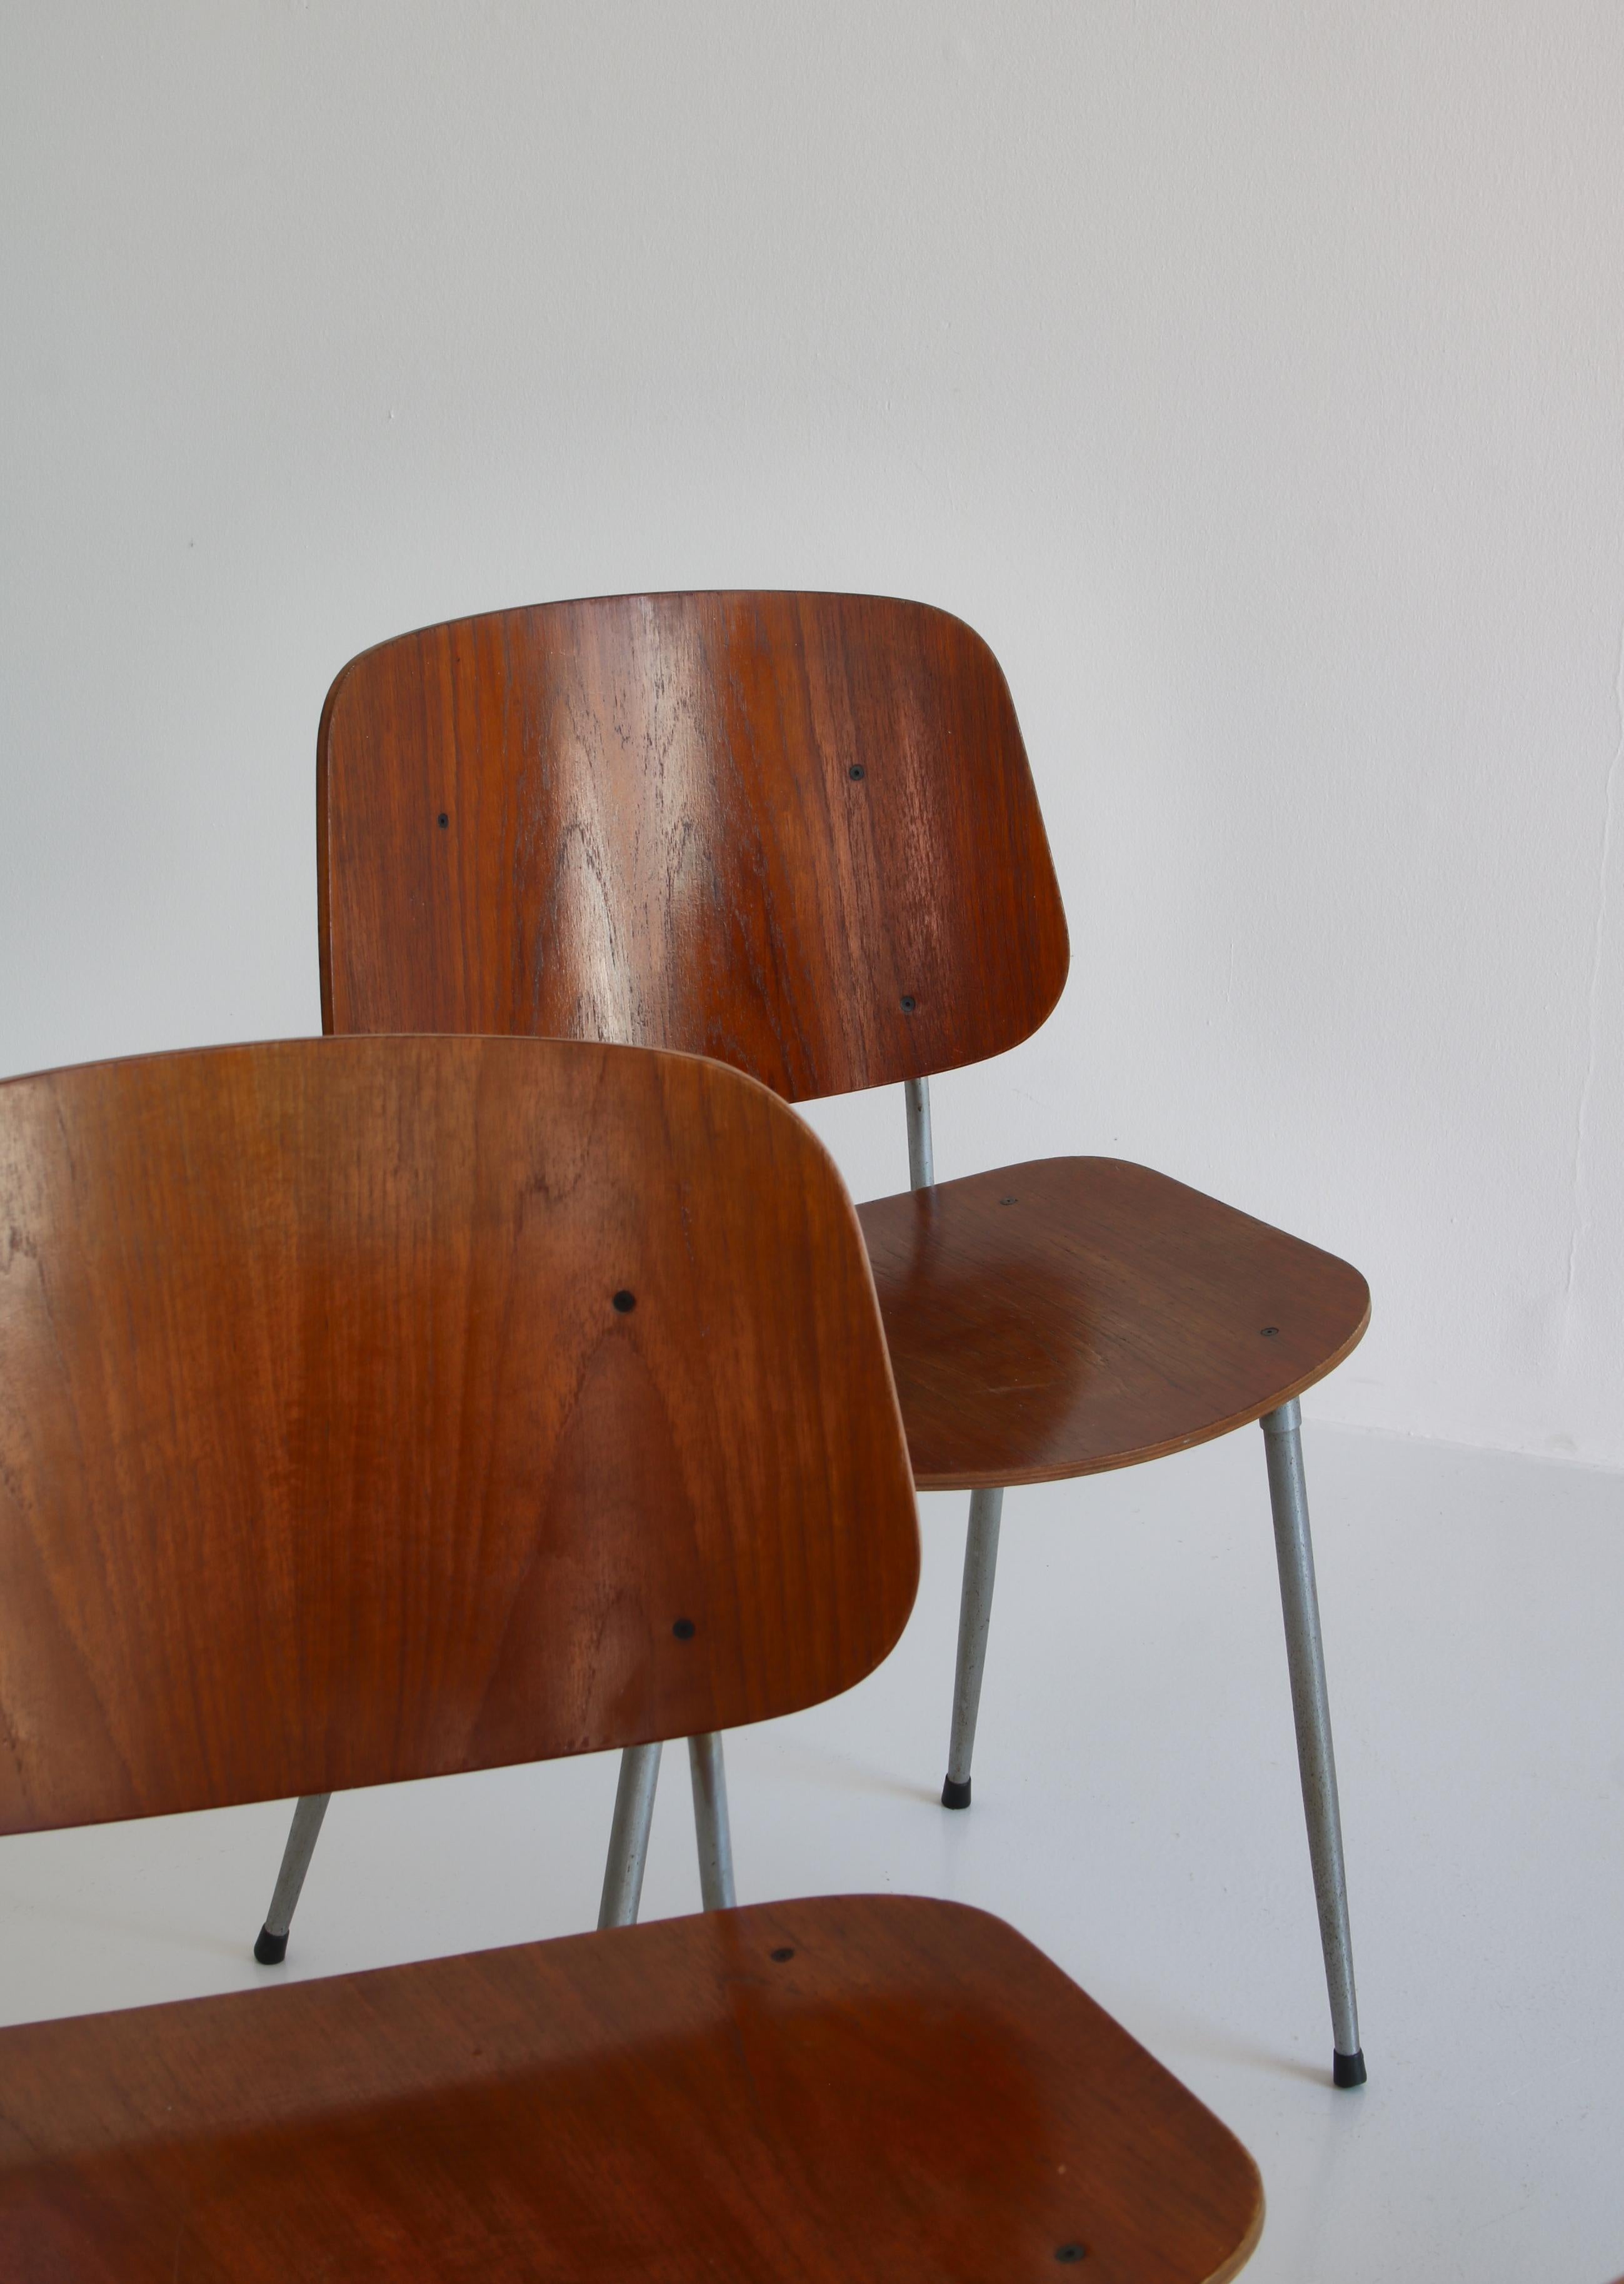 Mid-20th Century Danish Modern Børge Mogensen Dining Chairs in Steel and Plywood, 1953